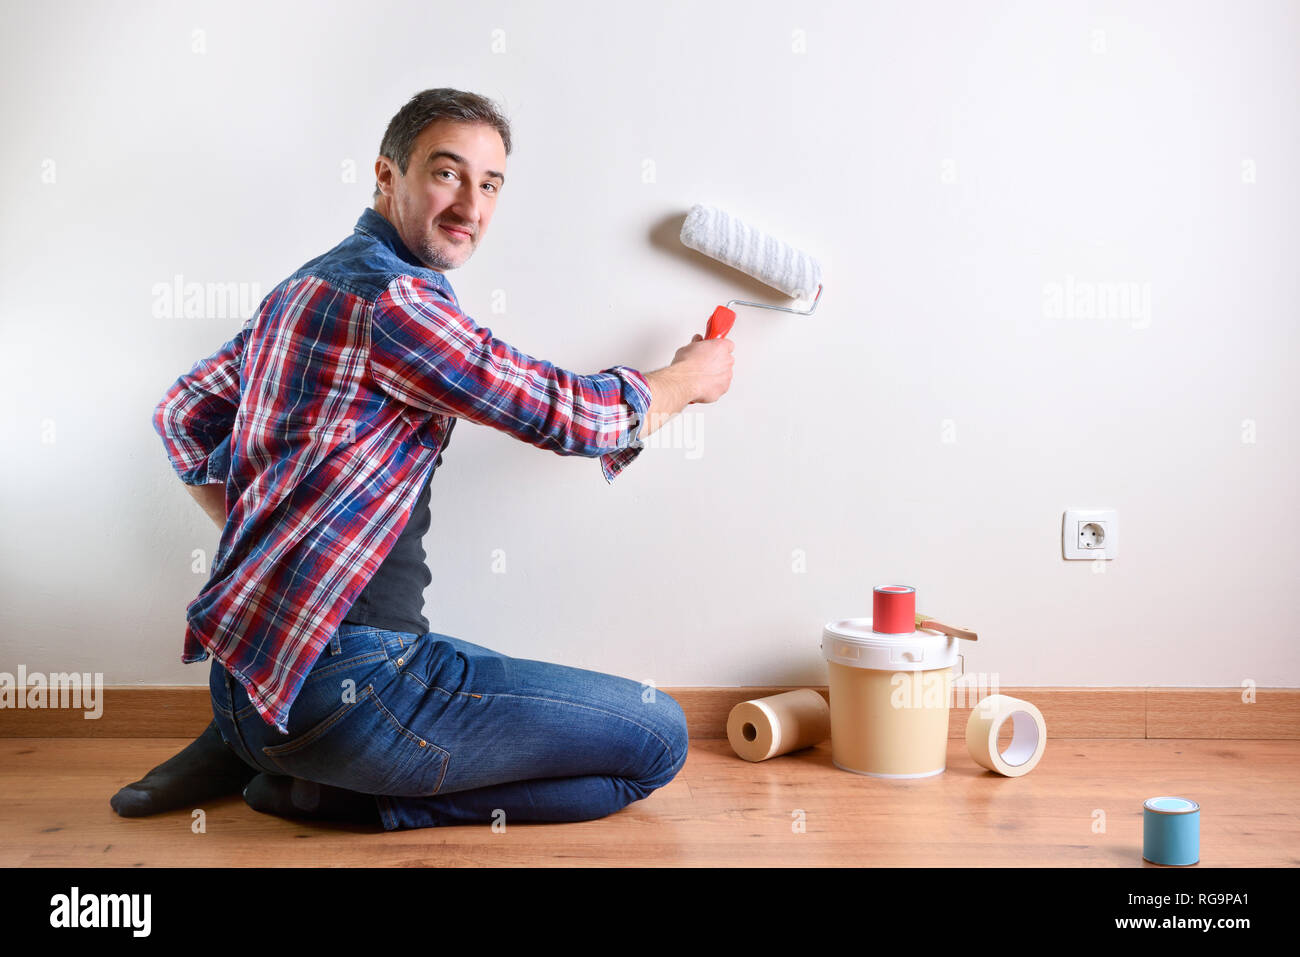 Smiling man kneeling on a parquet floor with paint material painting his house. Front view. Horizontal composition. Stock Photo